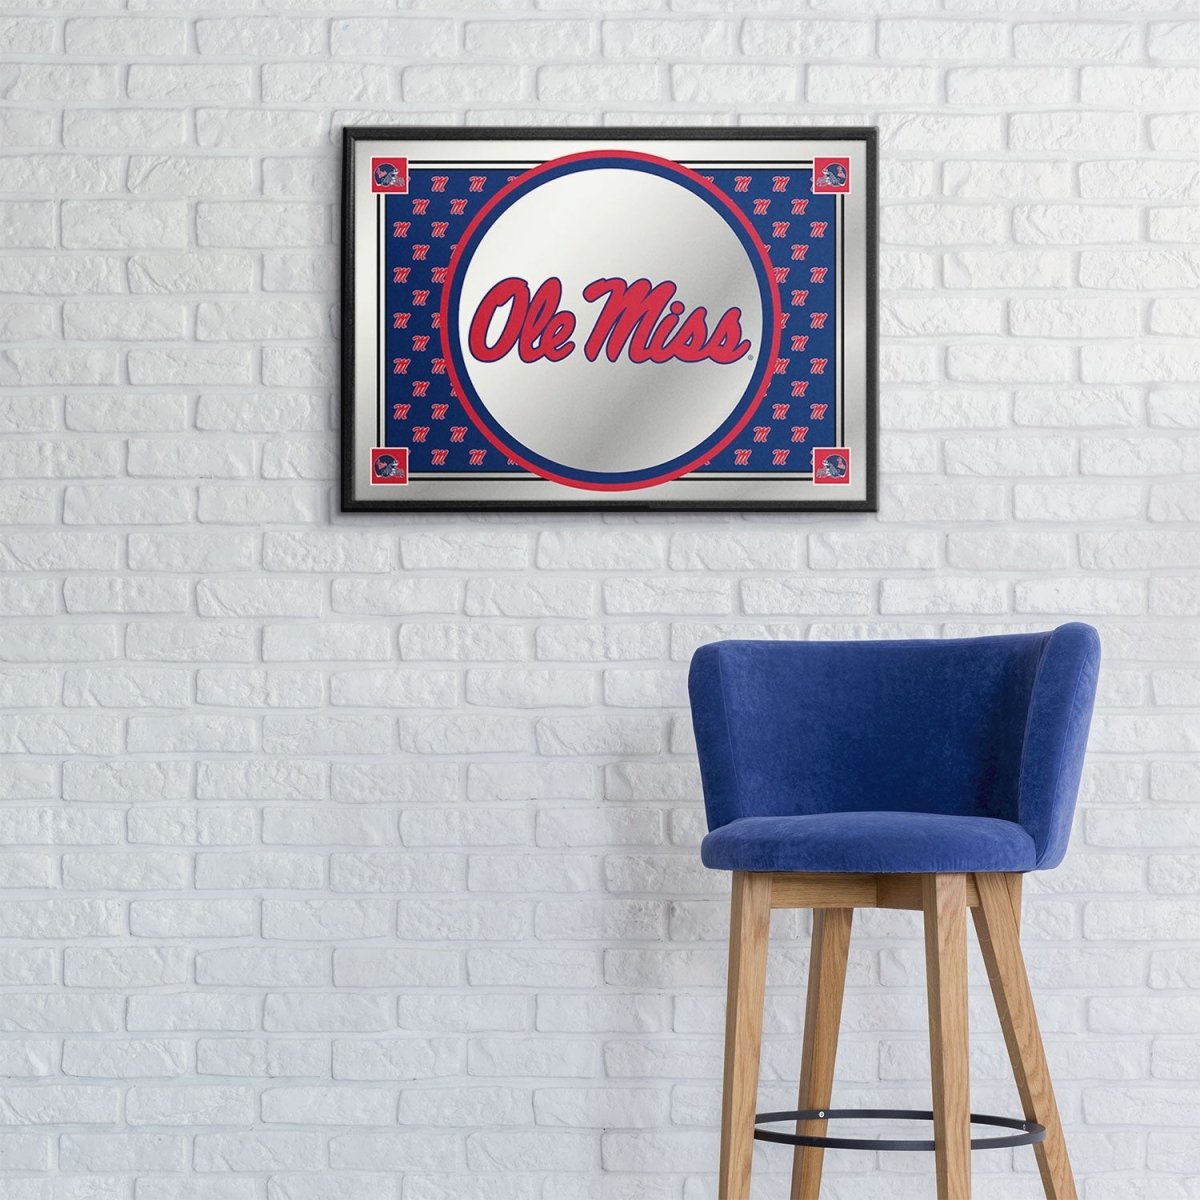 Ole Miss Rebels: Team Spirit - Framed Mirrored Wall Sign - The Fan-Brand